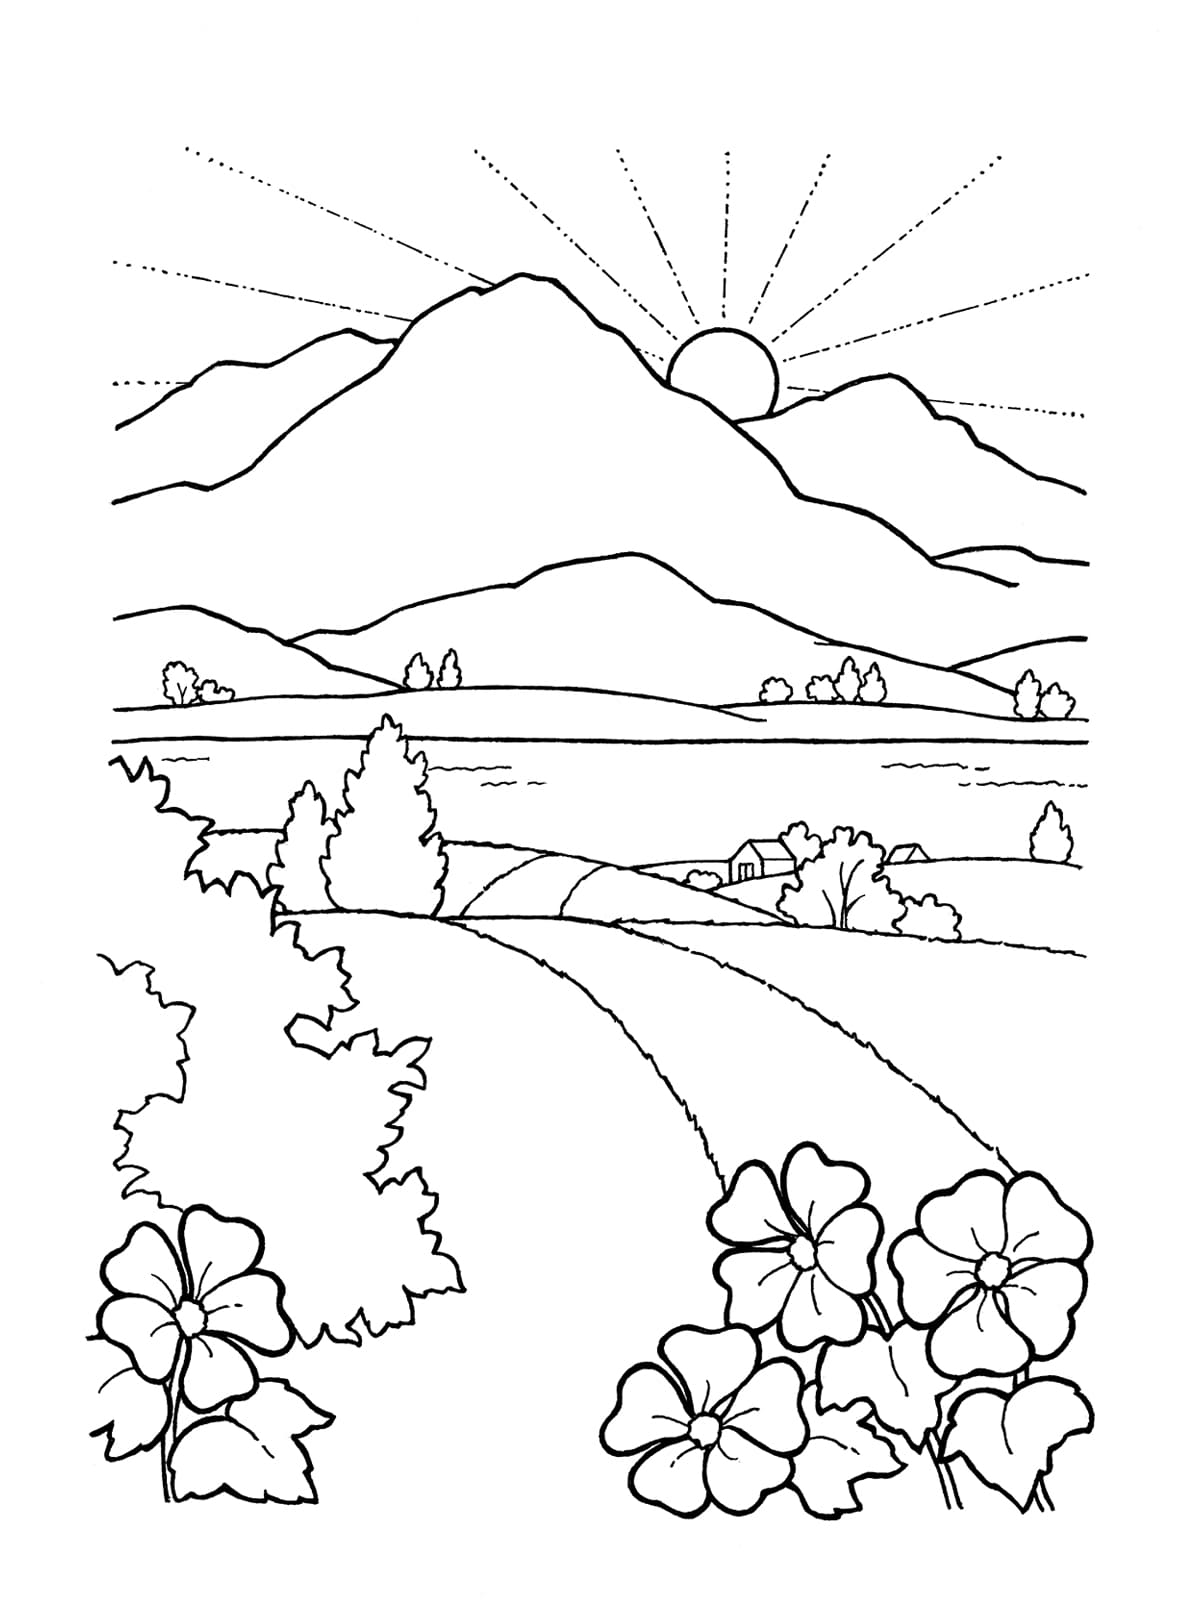 Mountain in the Sunset Coloring Page